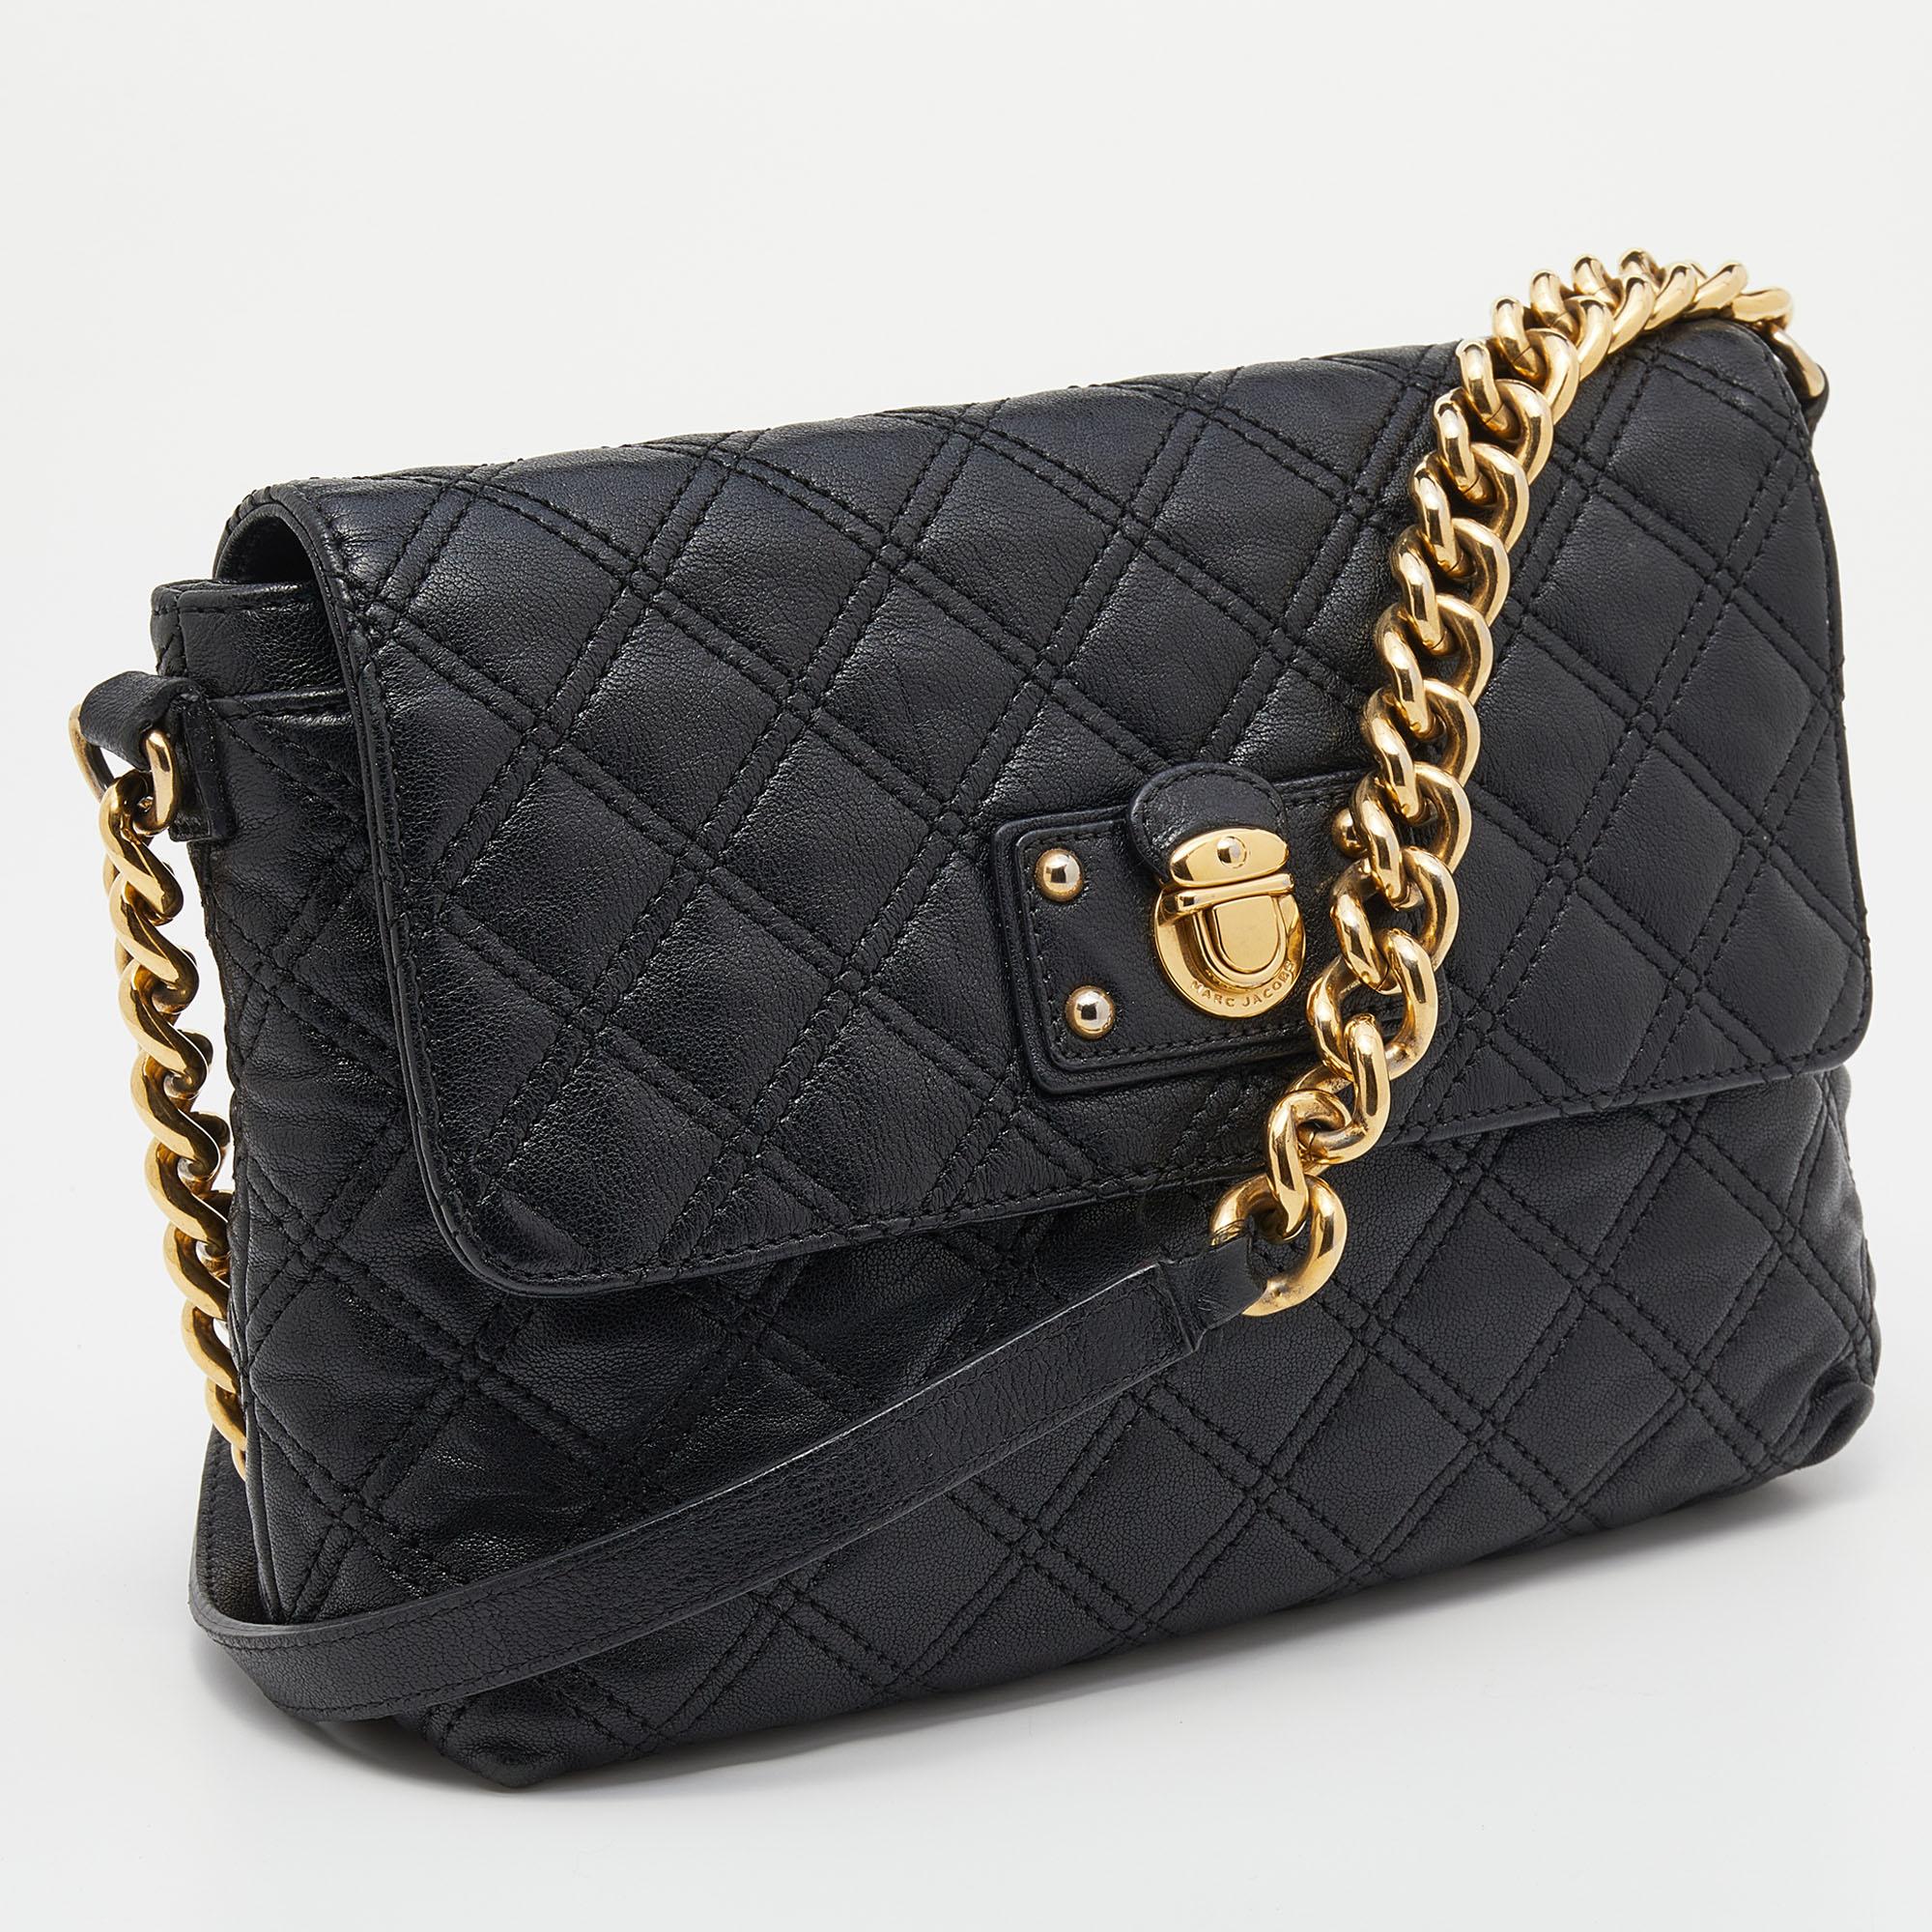 marc jacobs black bag with gold chain